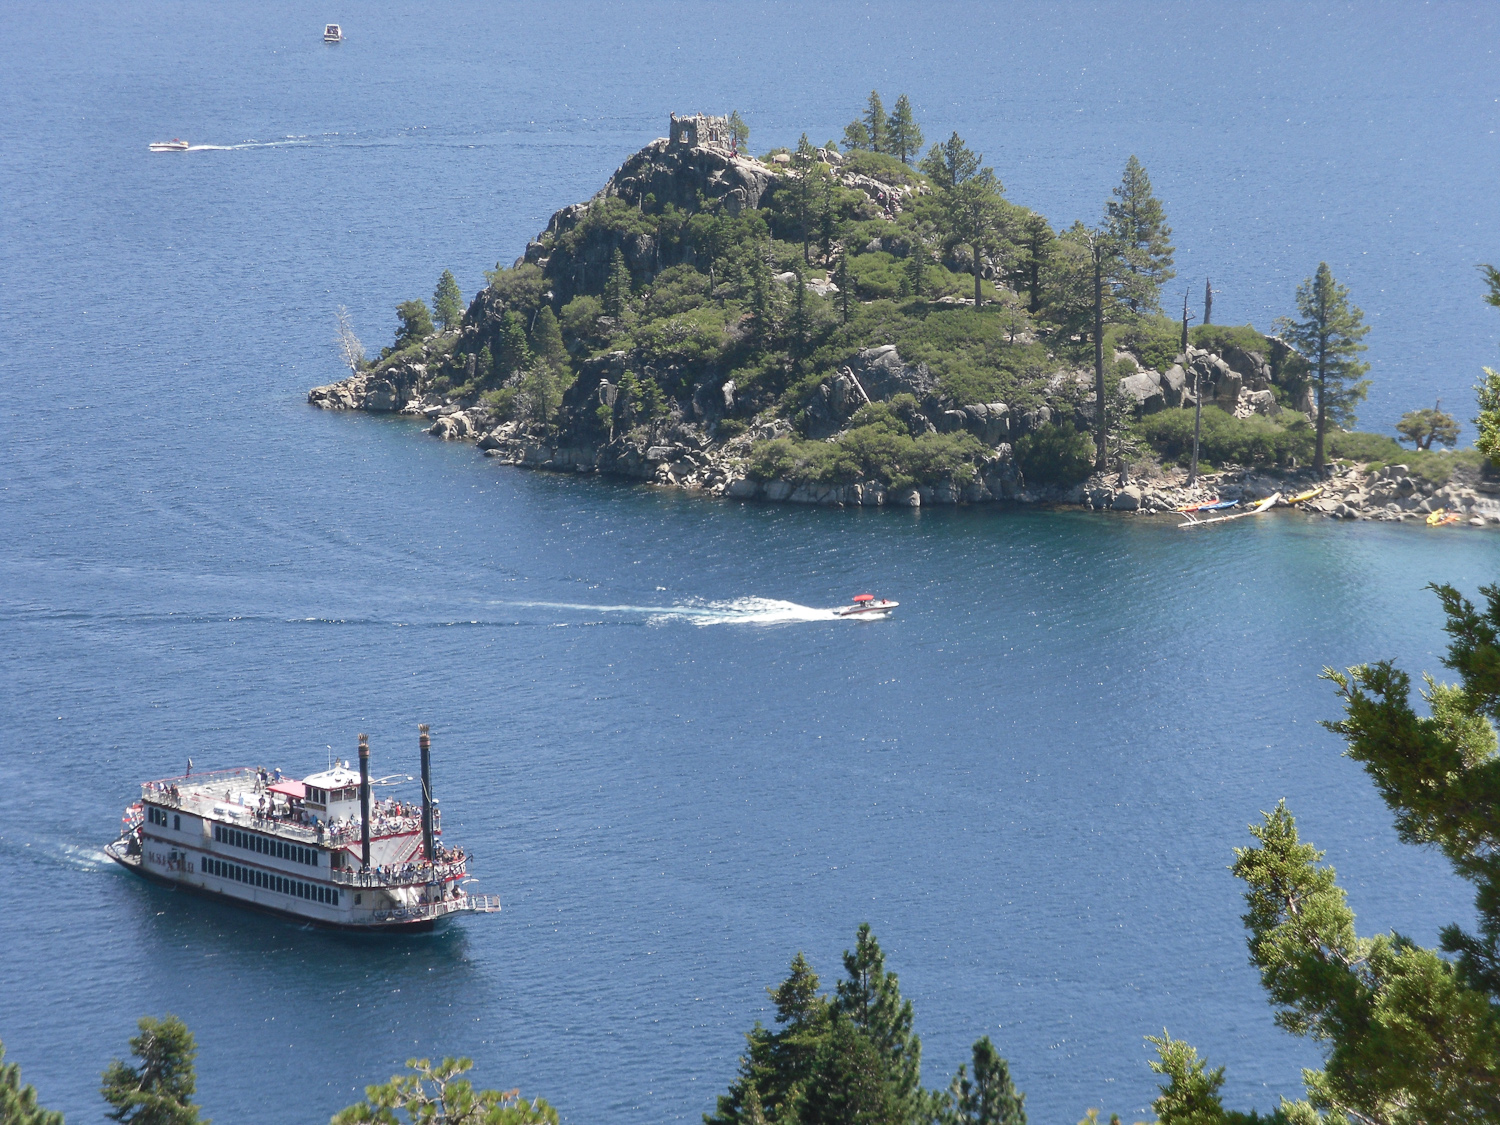 Views of Fannette Island in Emerald Bay from trail to Vikingsholm- Tahoe Queen in foreground